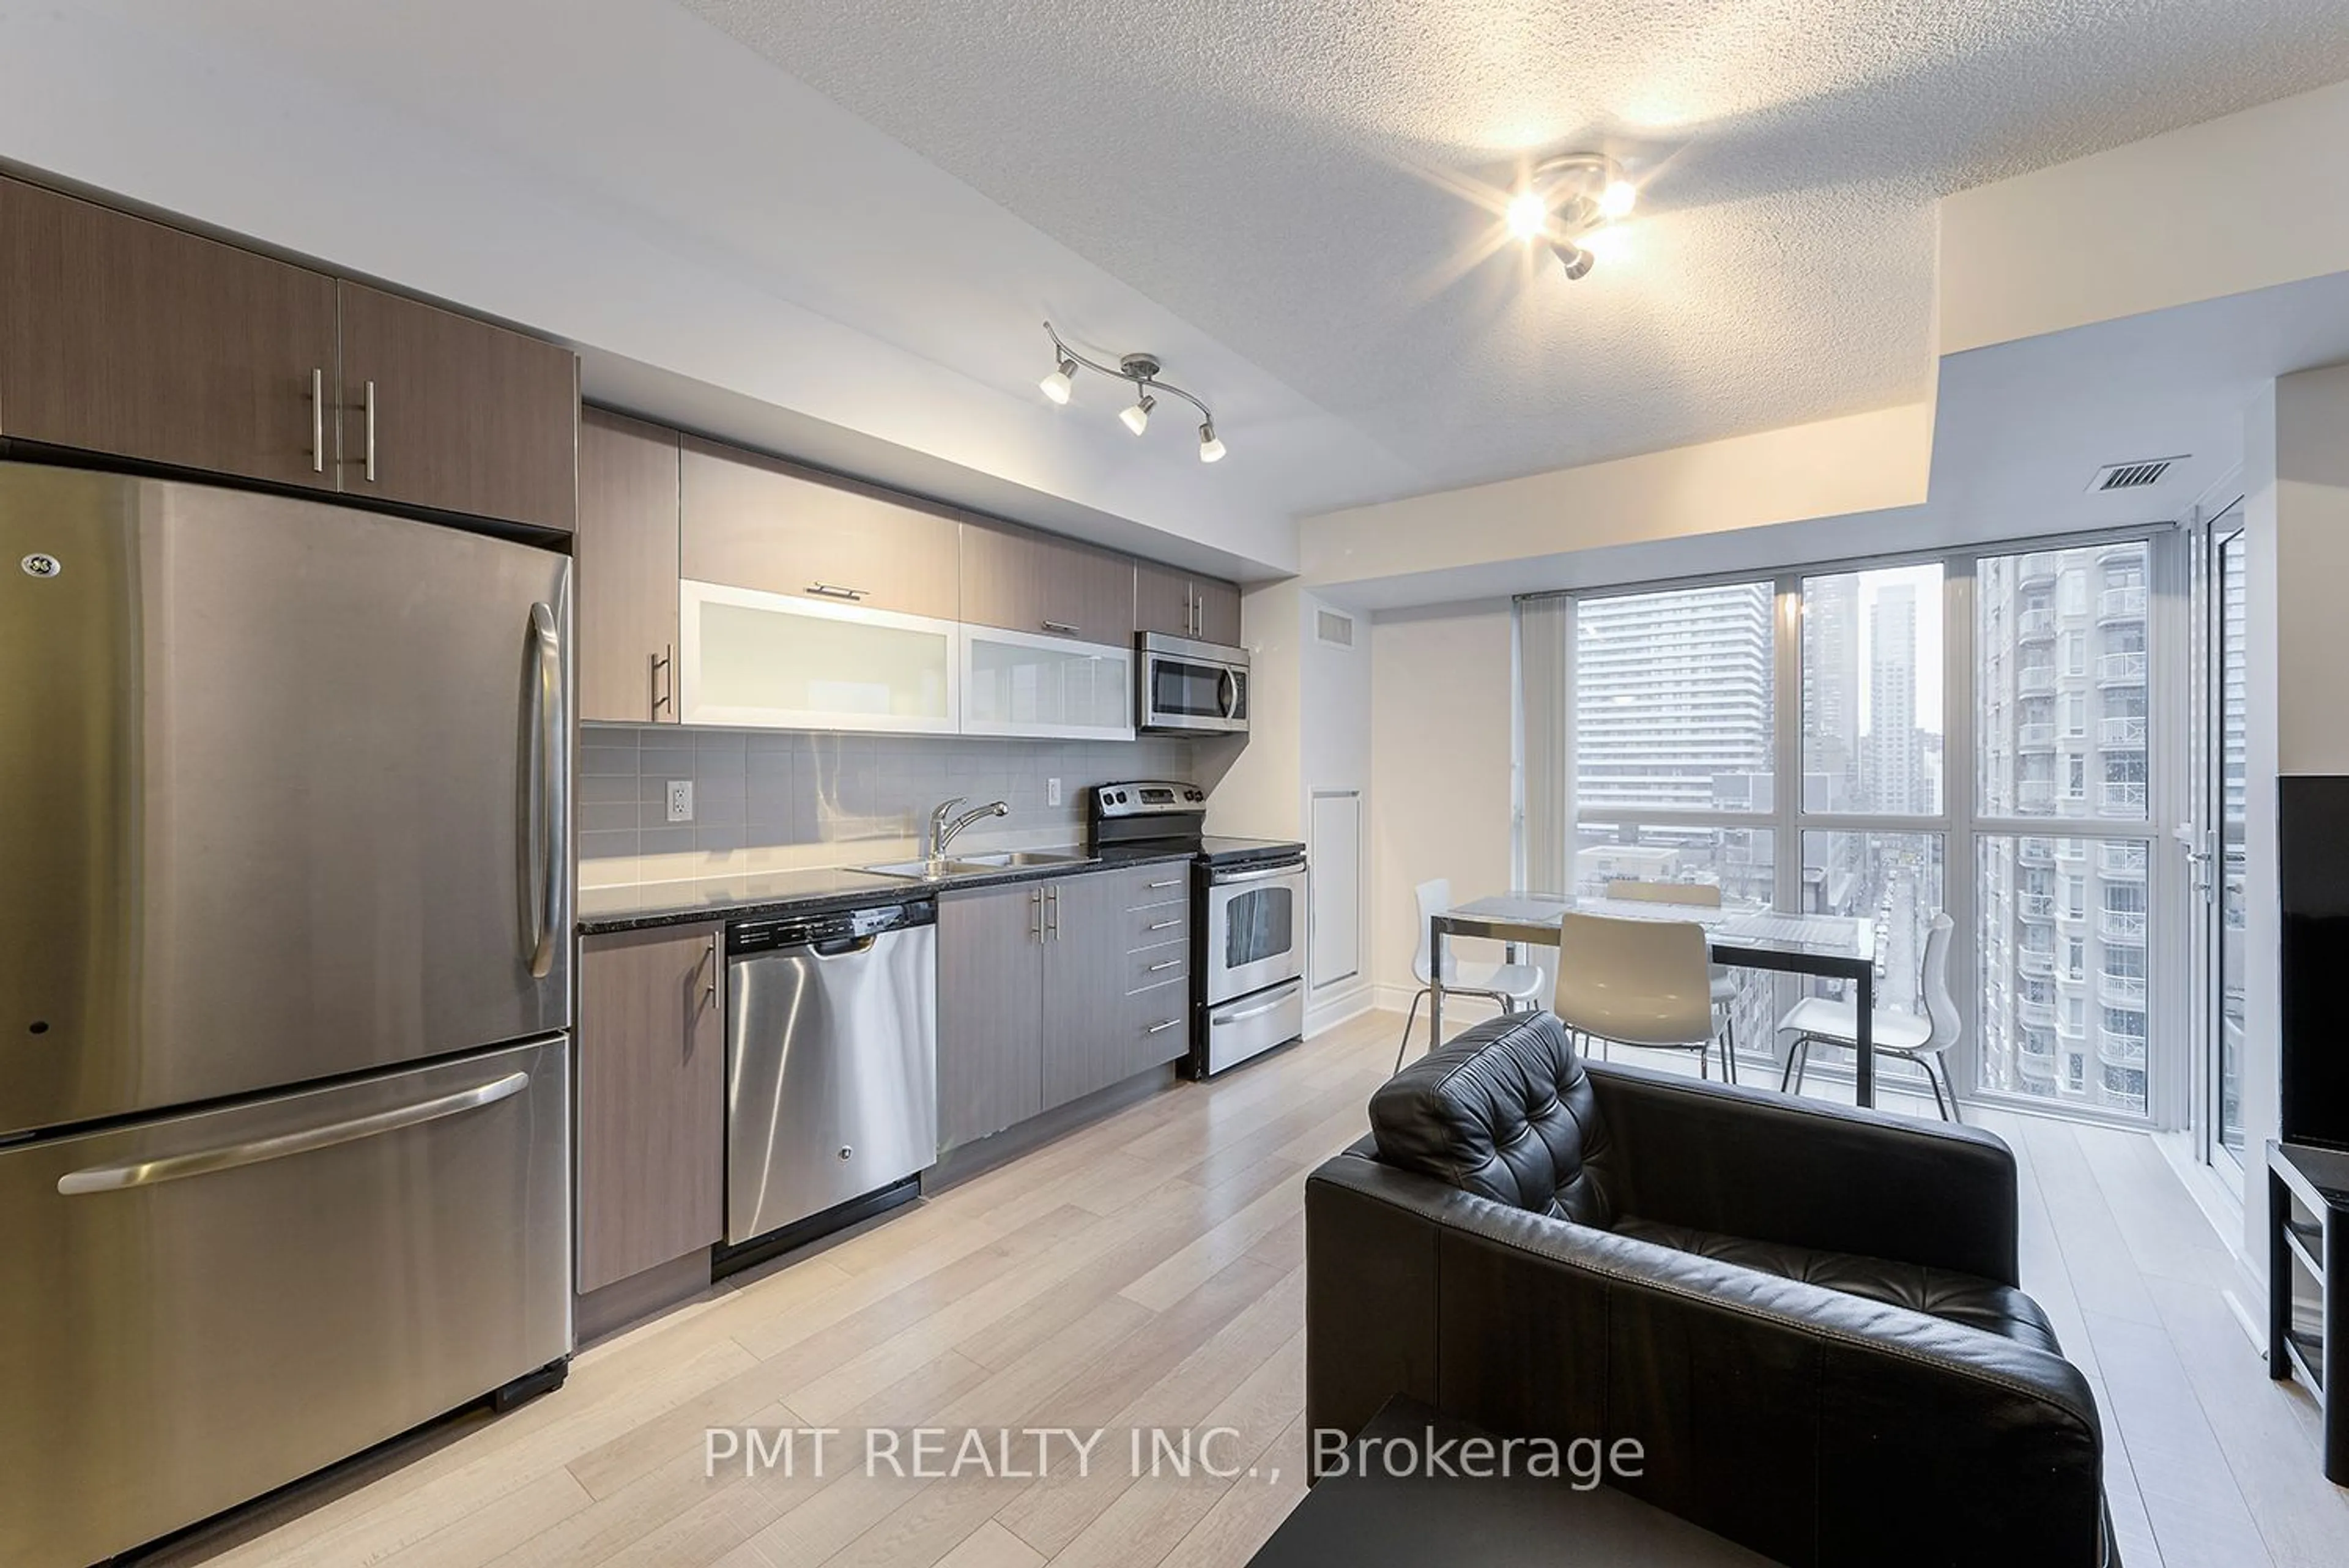 Standard kitchen for 28 Ted Rogers Way #1508, Toronto Ontario M4Y 2J4